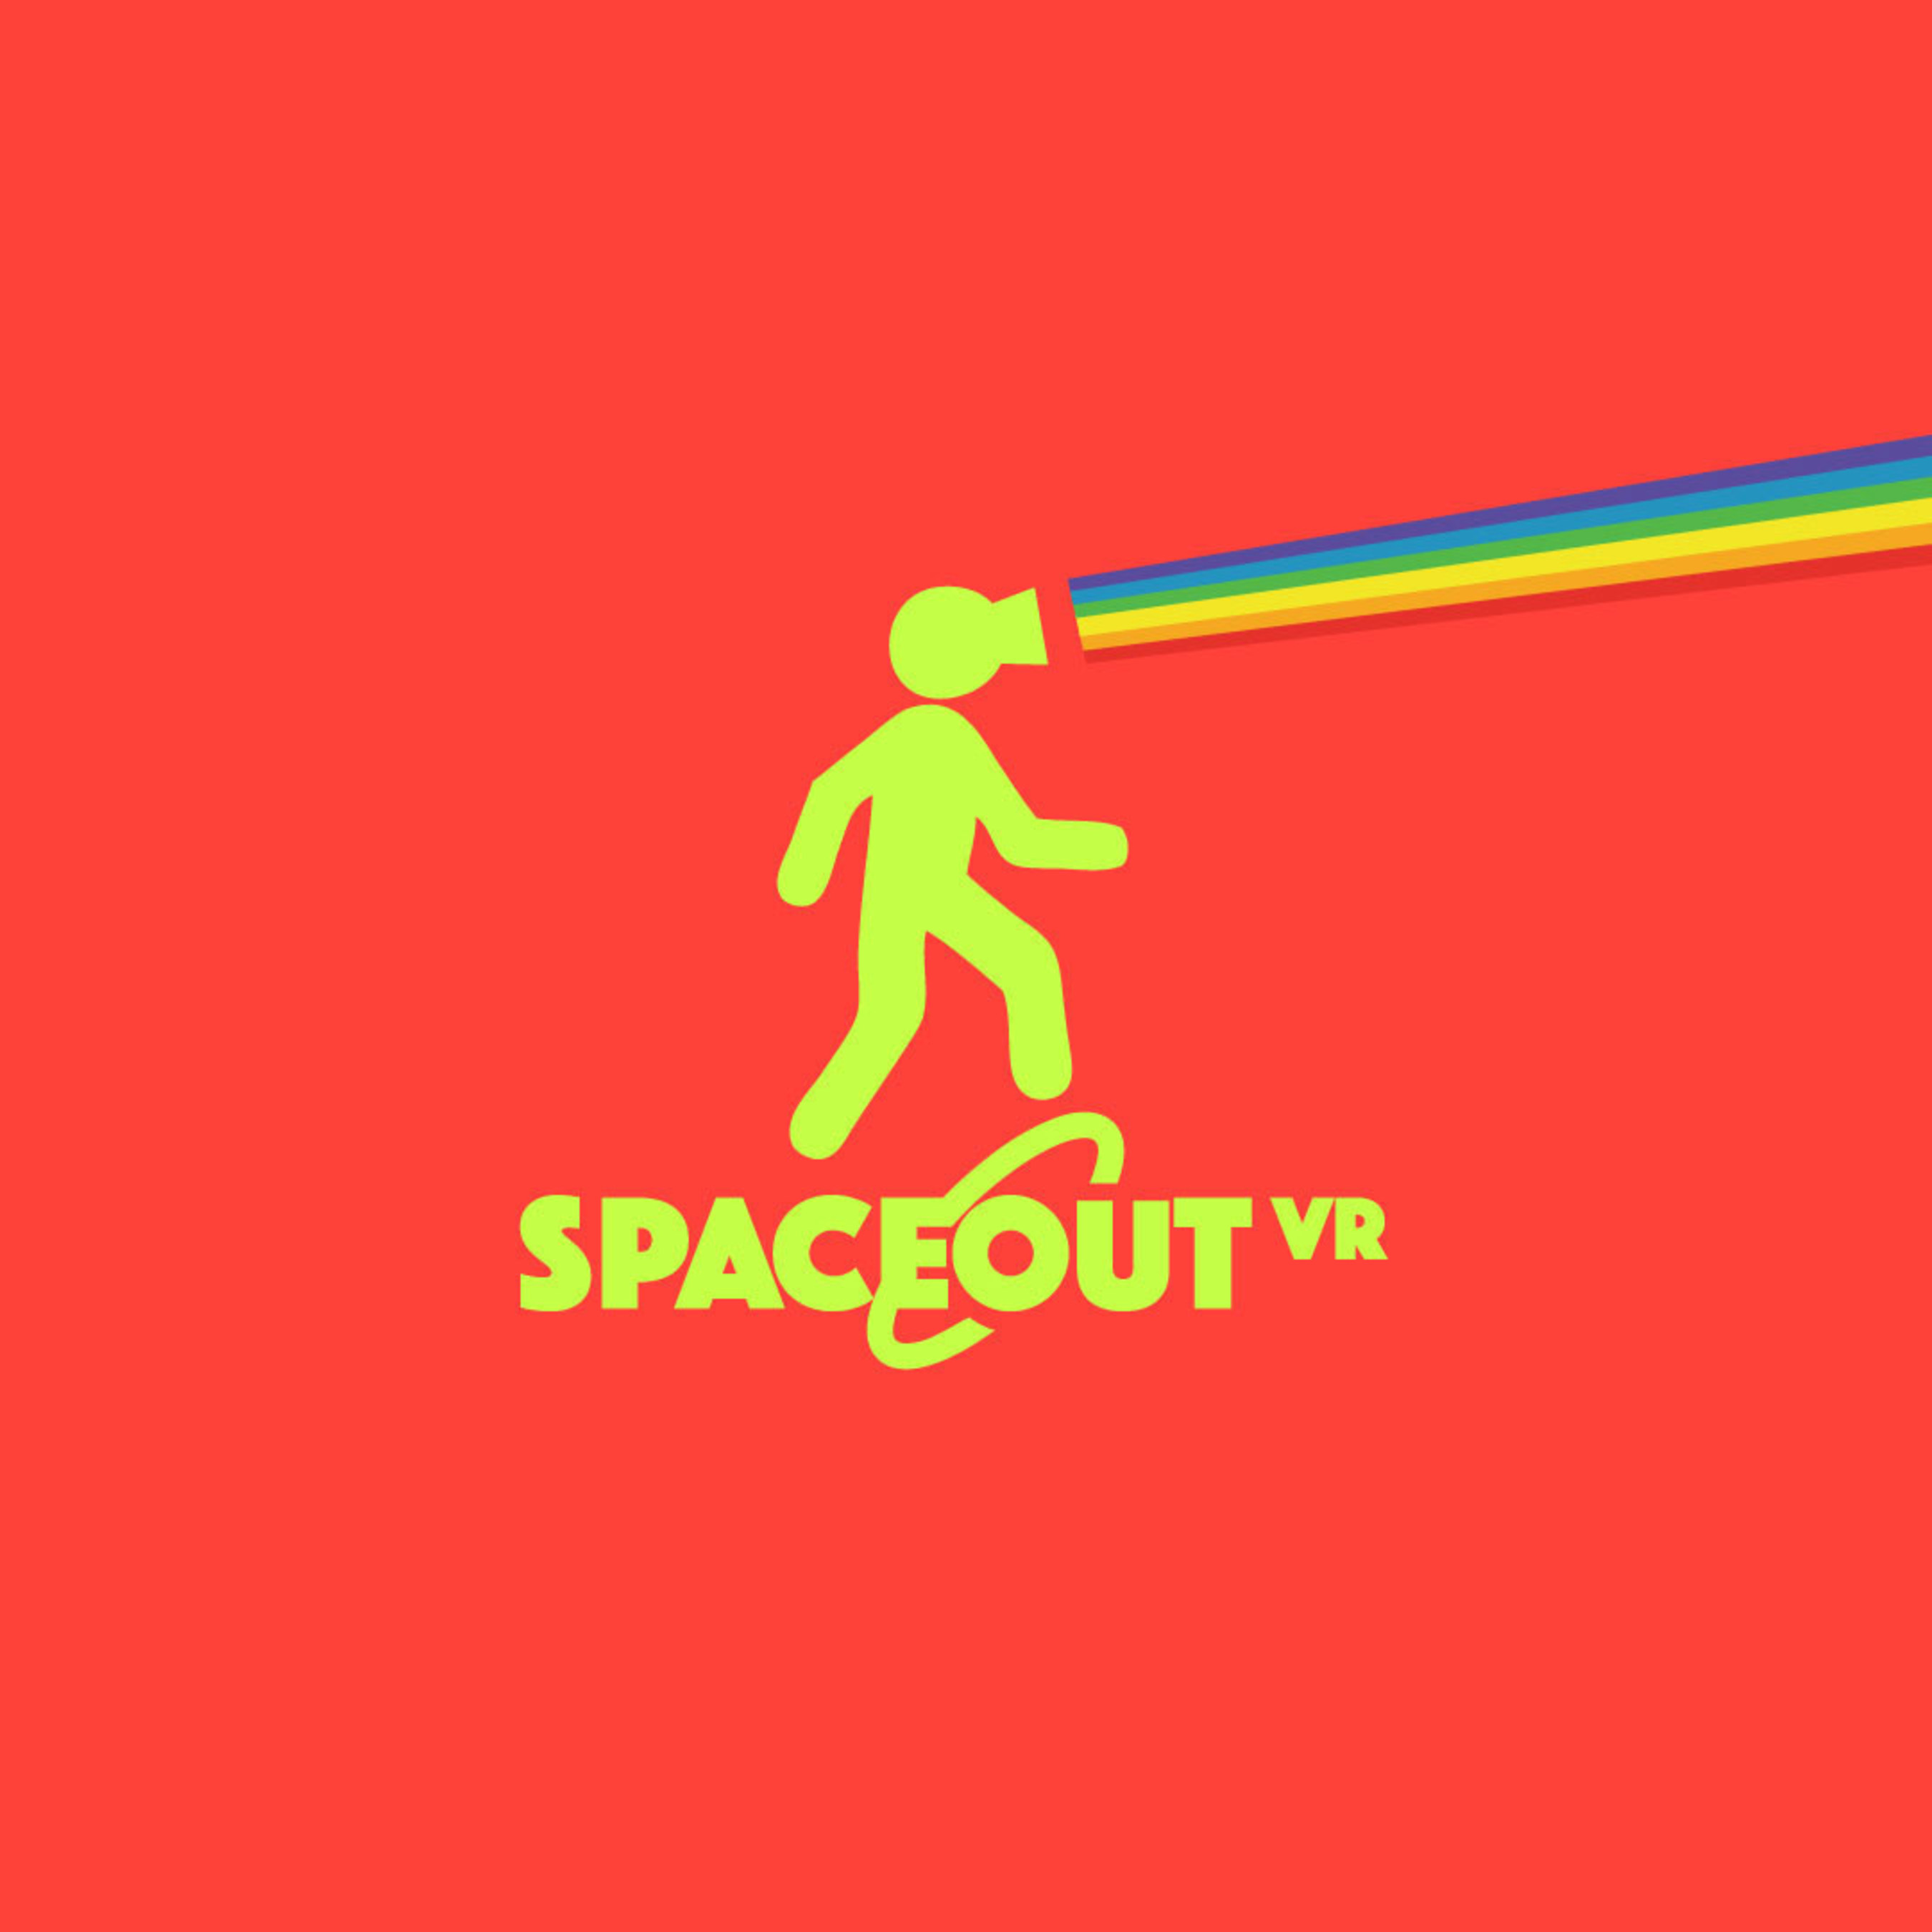 SpaceoutVR, Inc.